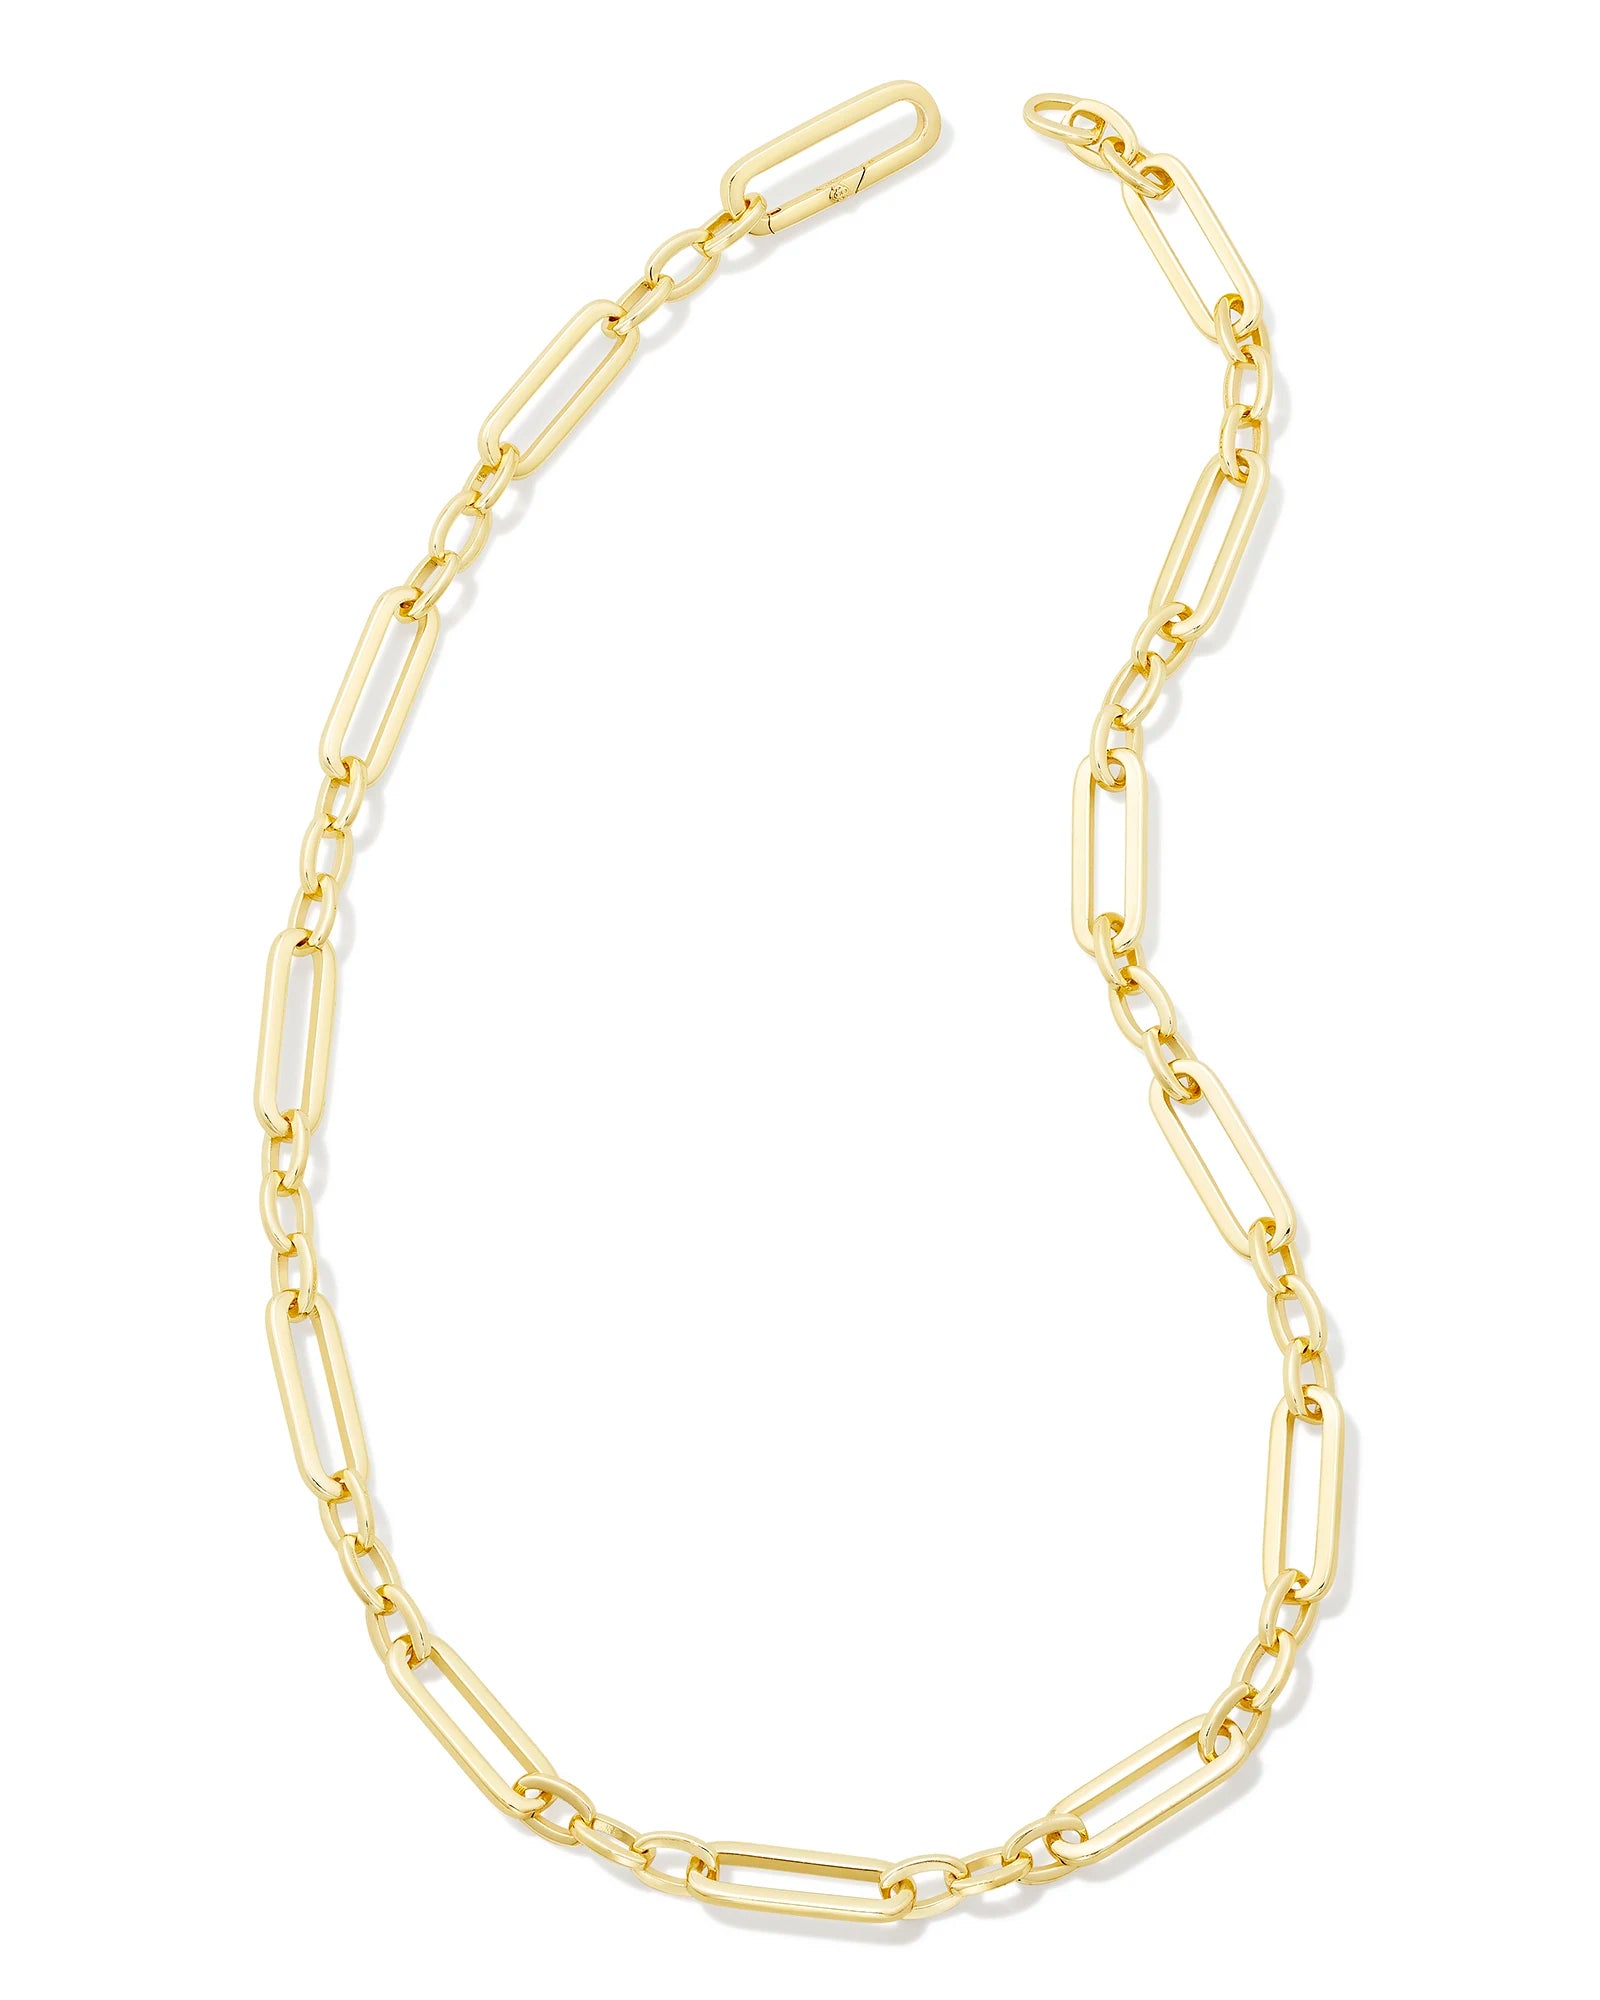 Kendra Scott | Heather Link and Chain Necklace in Gold - Giddy Up Glamour Boutique